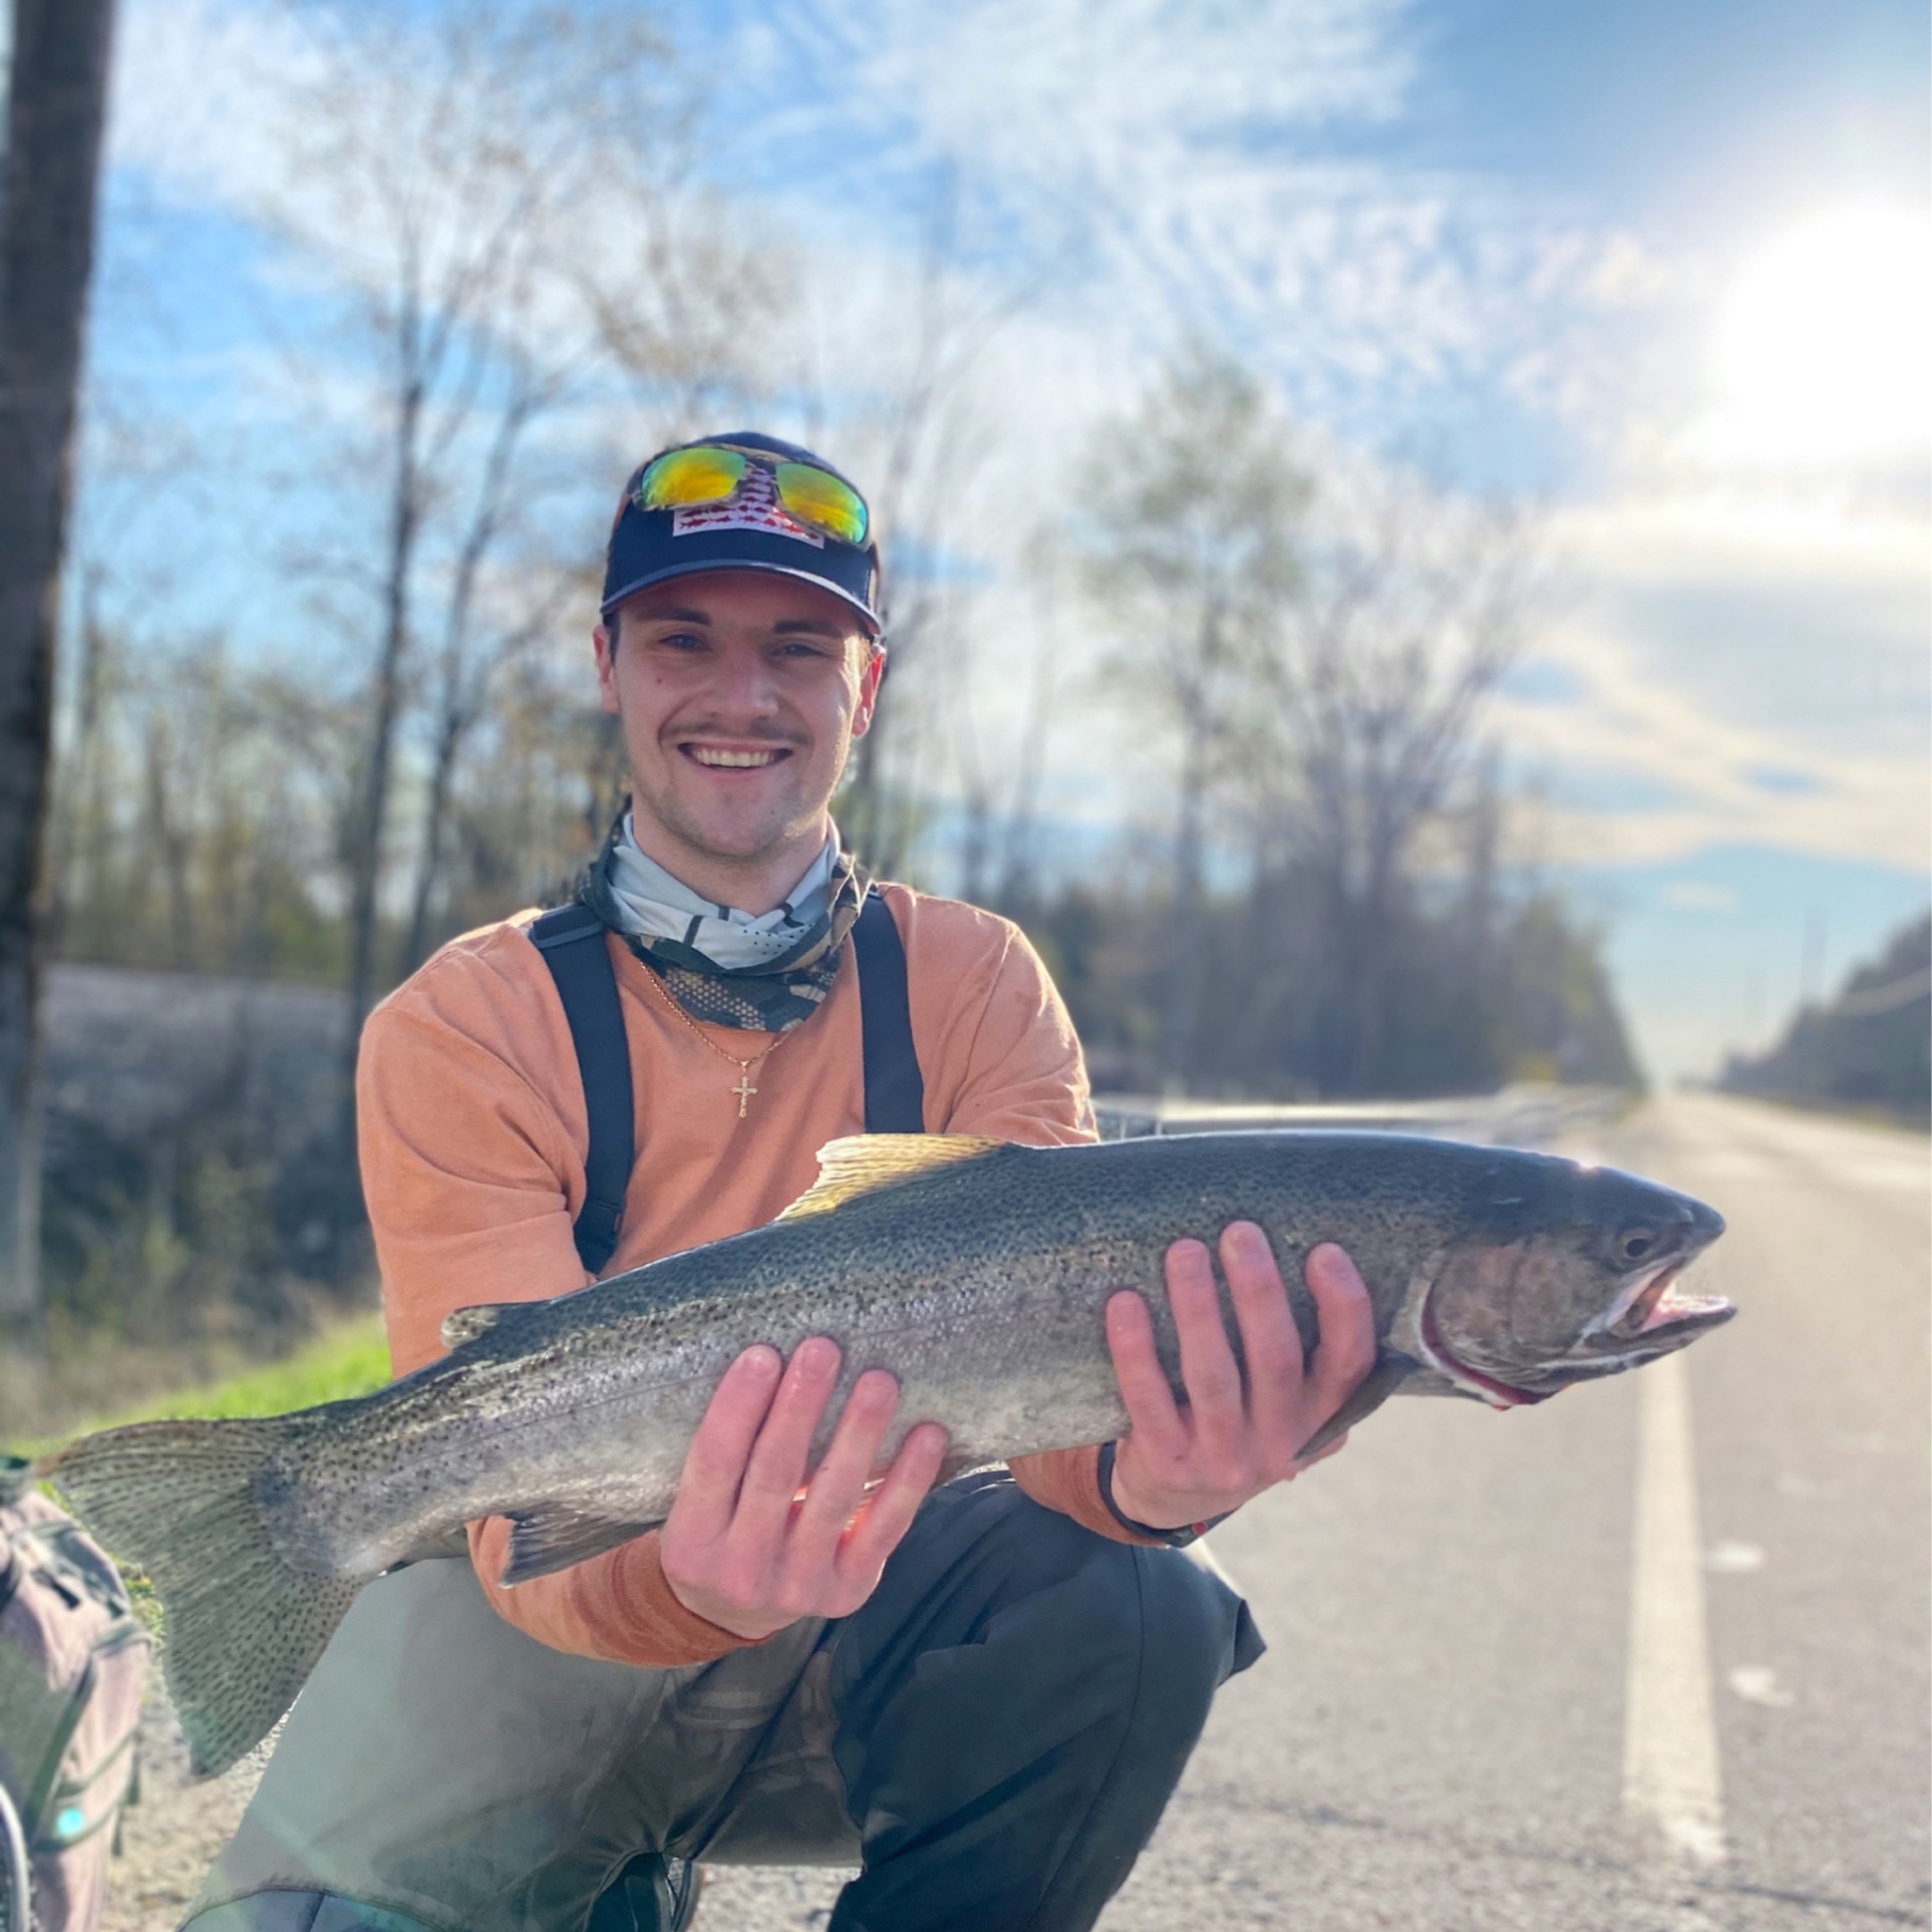 Corey Tomsich smiling and holding a large fish.